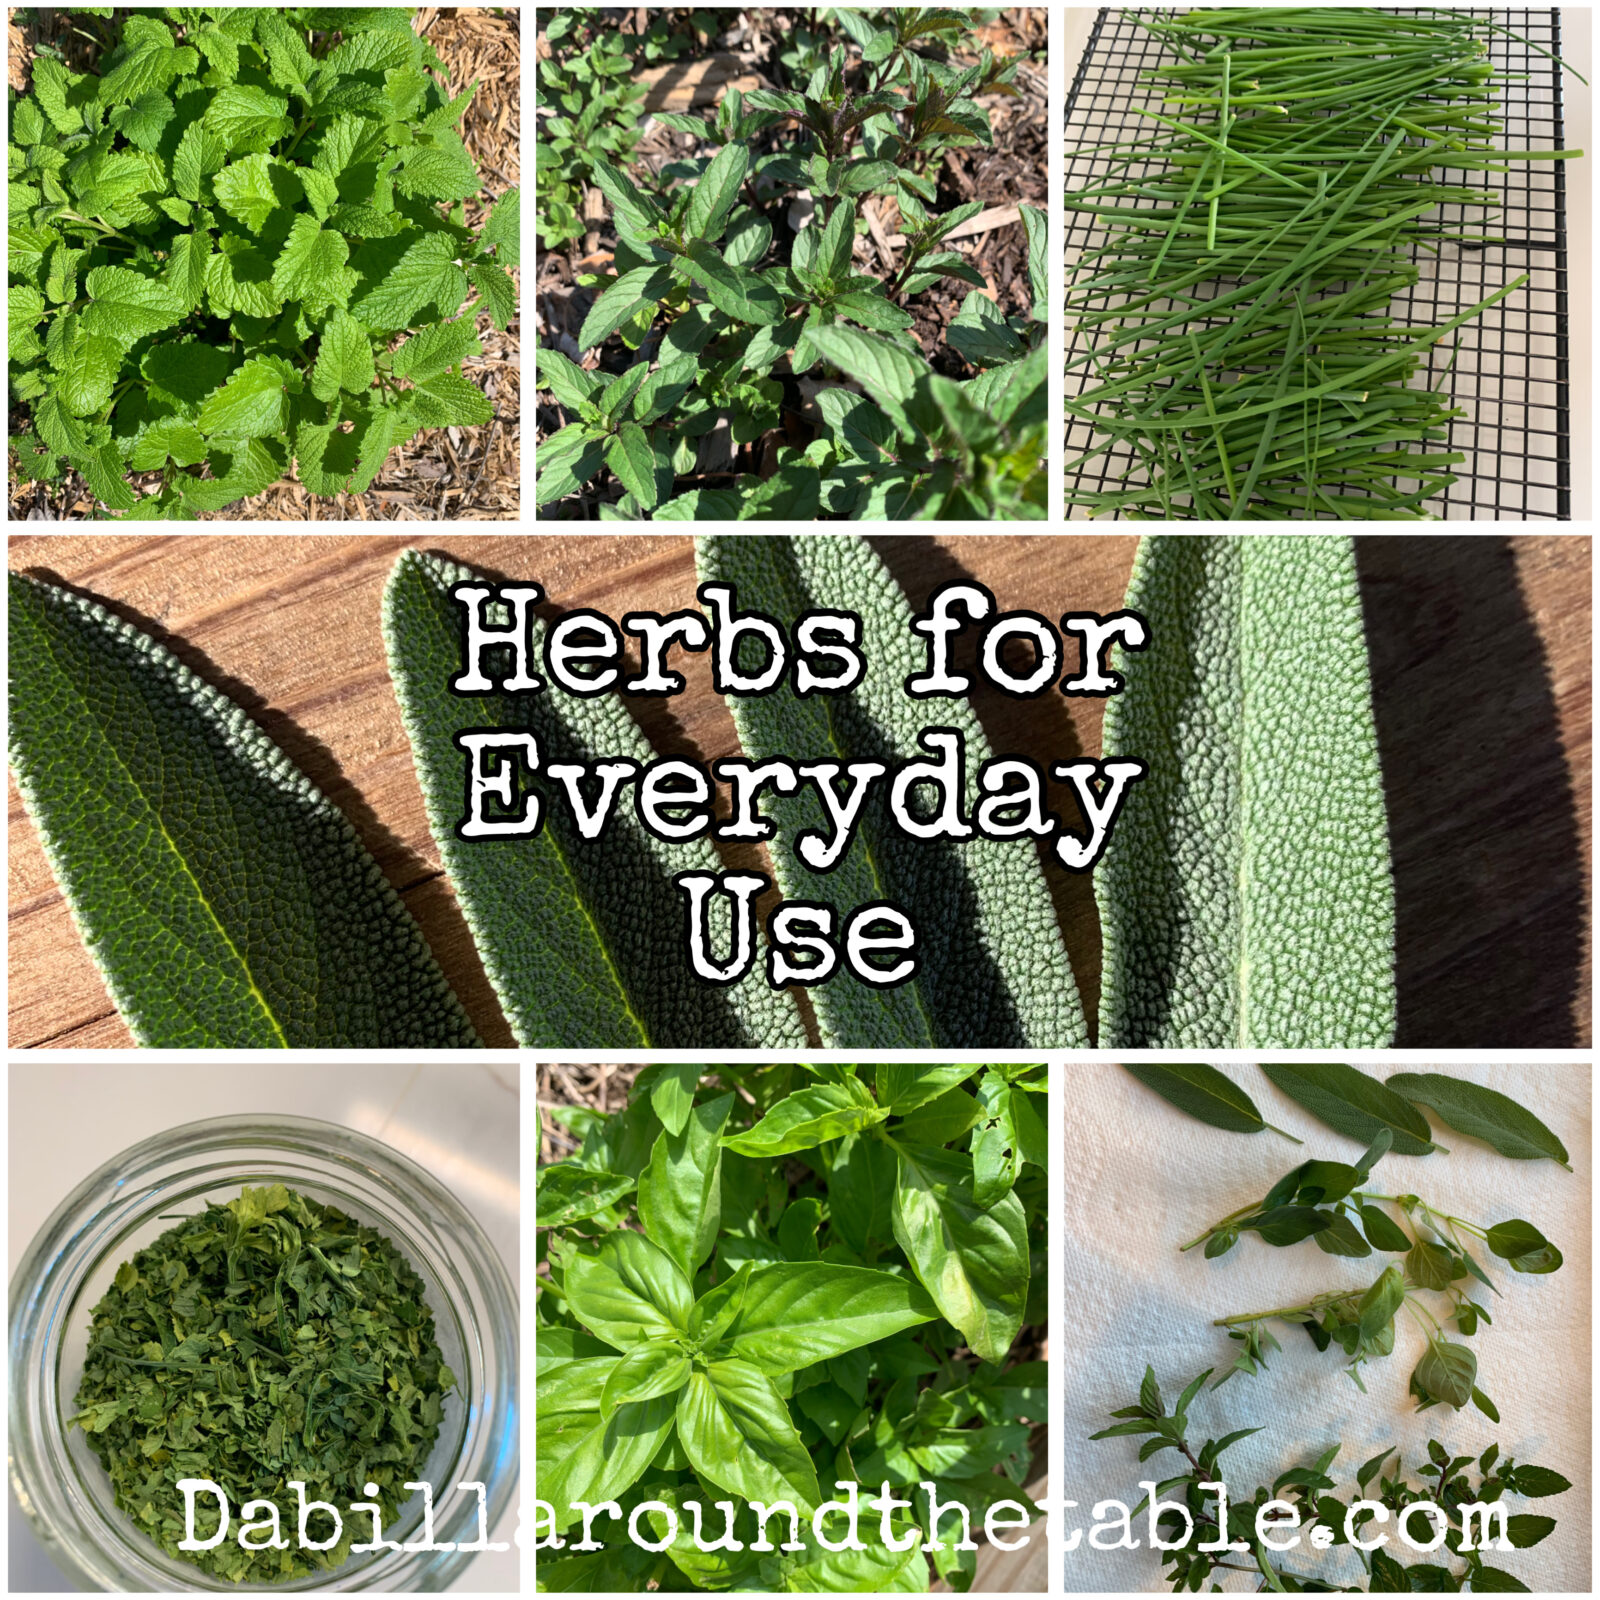 Grow Herbs for Daily Use and Tea